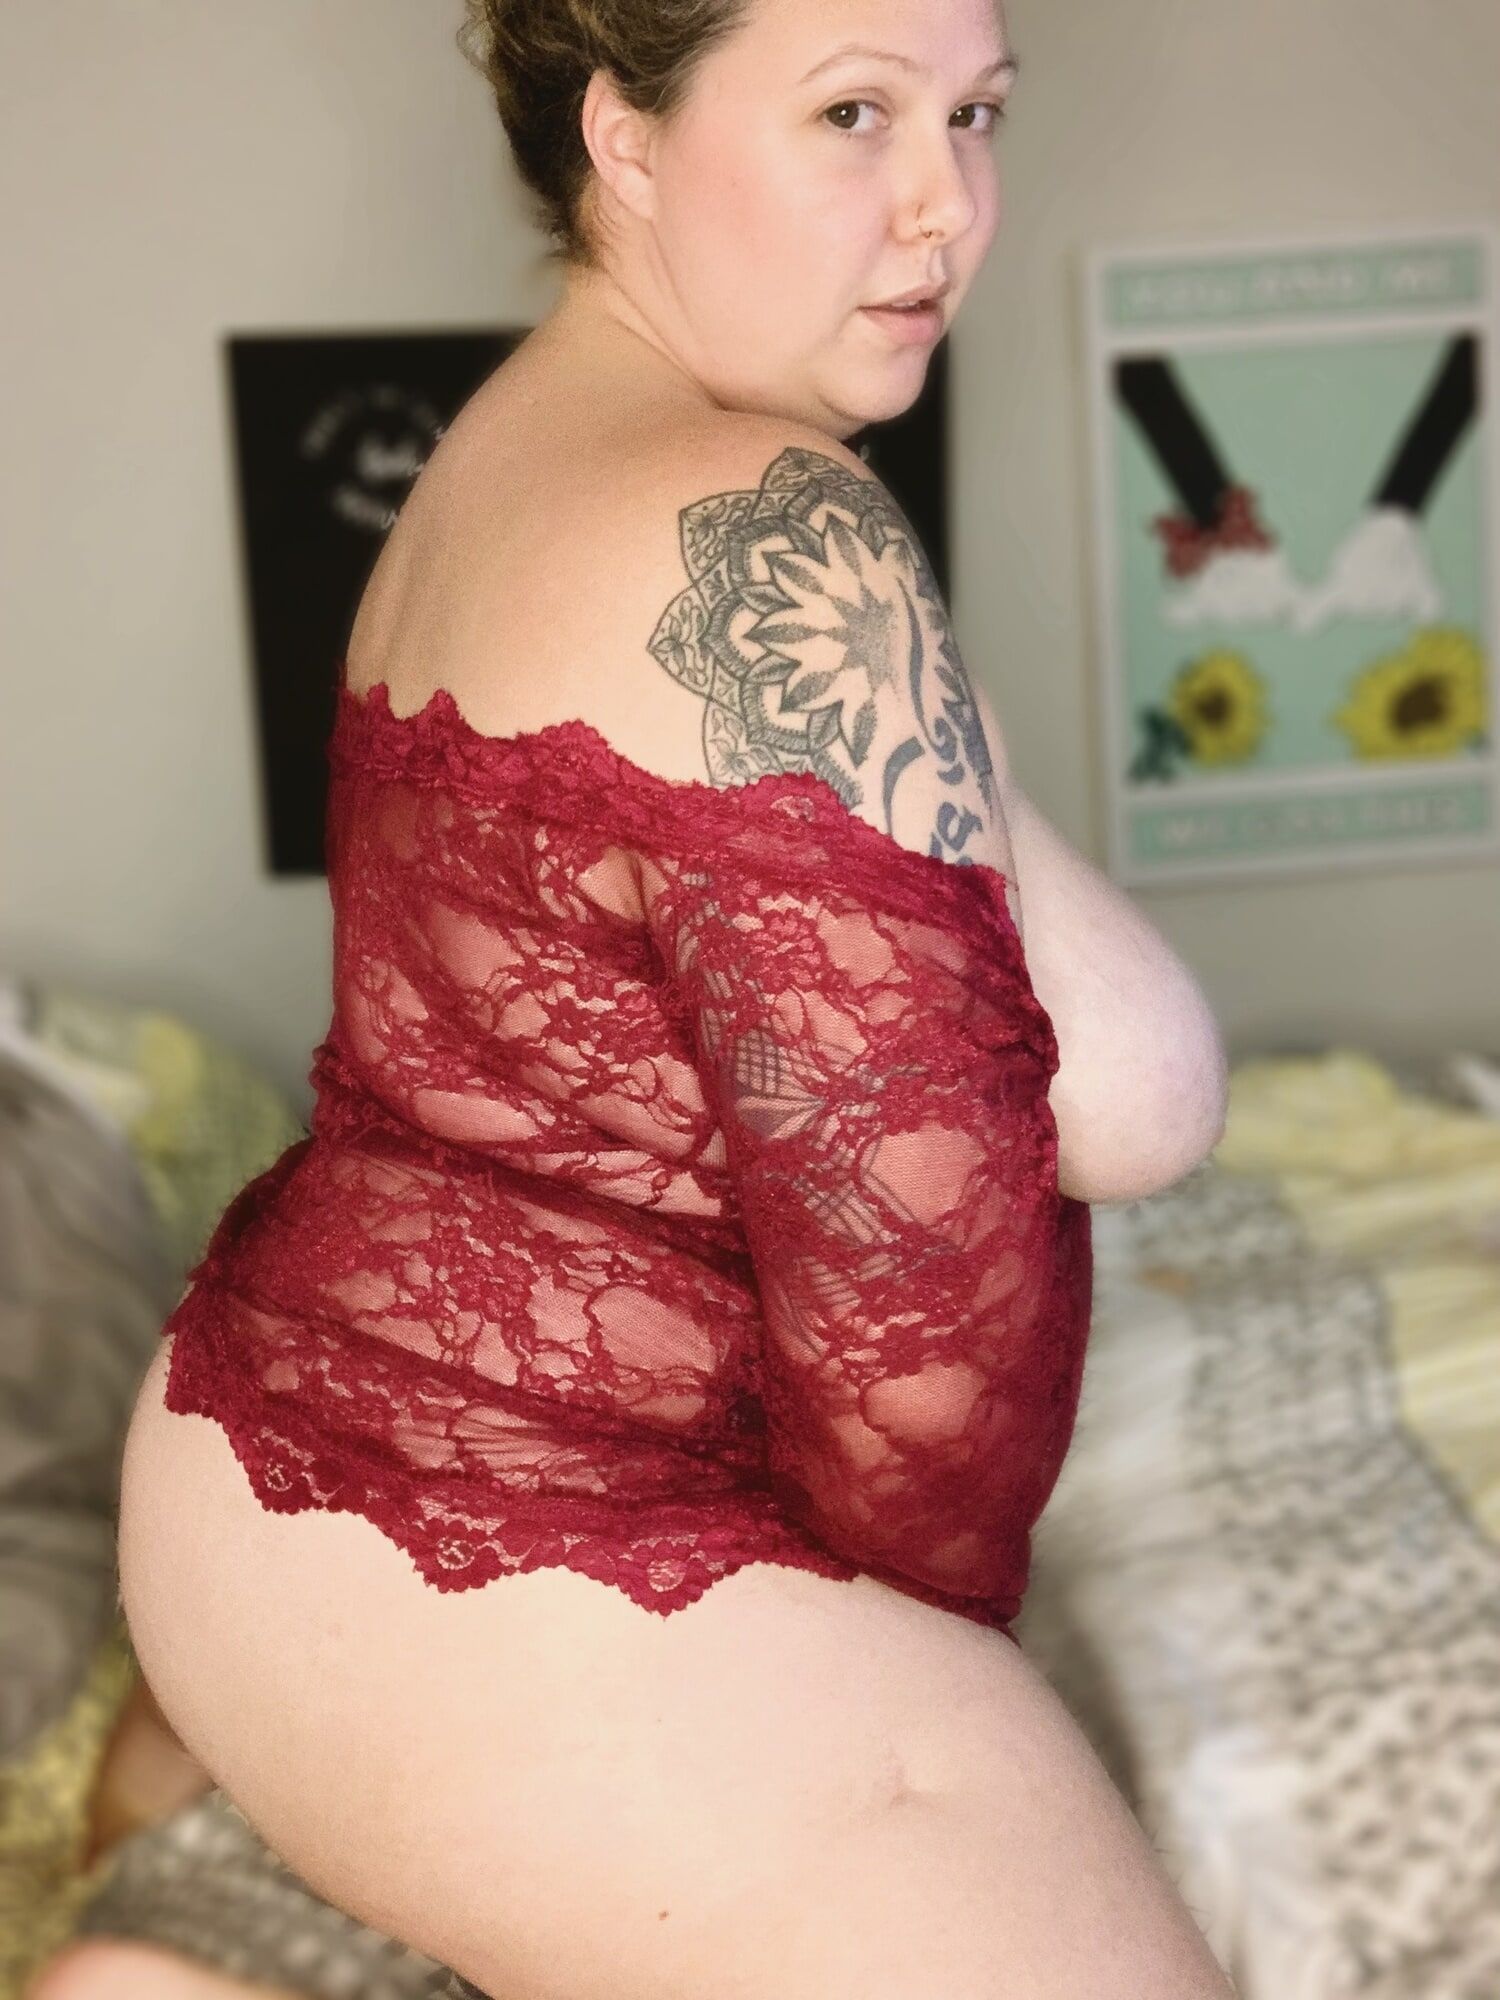 Ink and lace (and milky tits and ass) #3